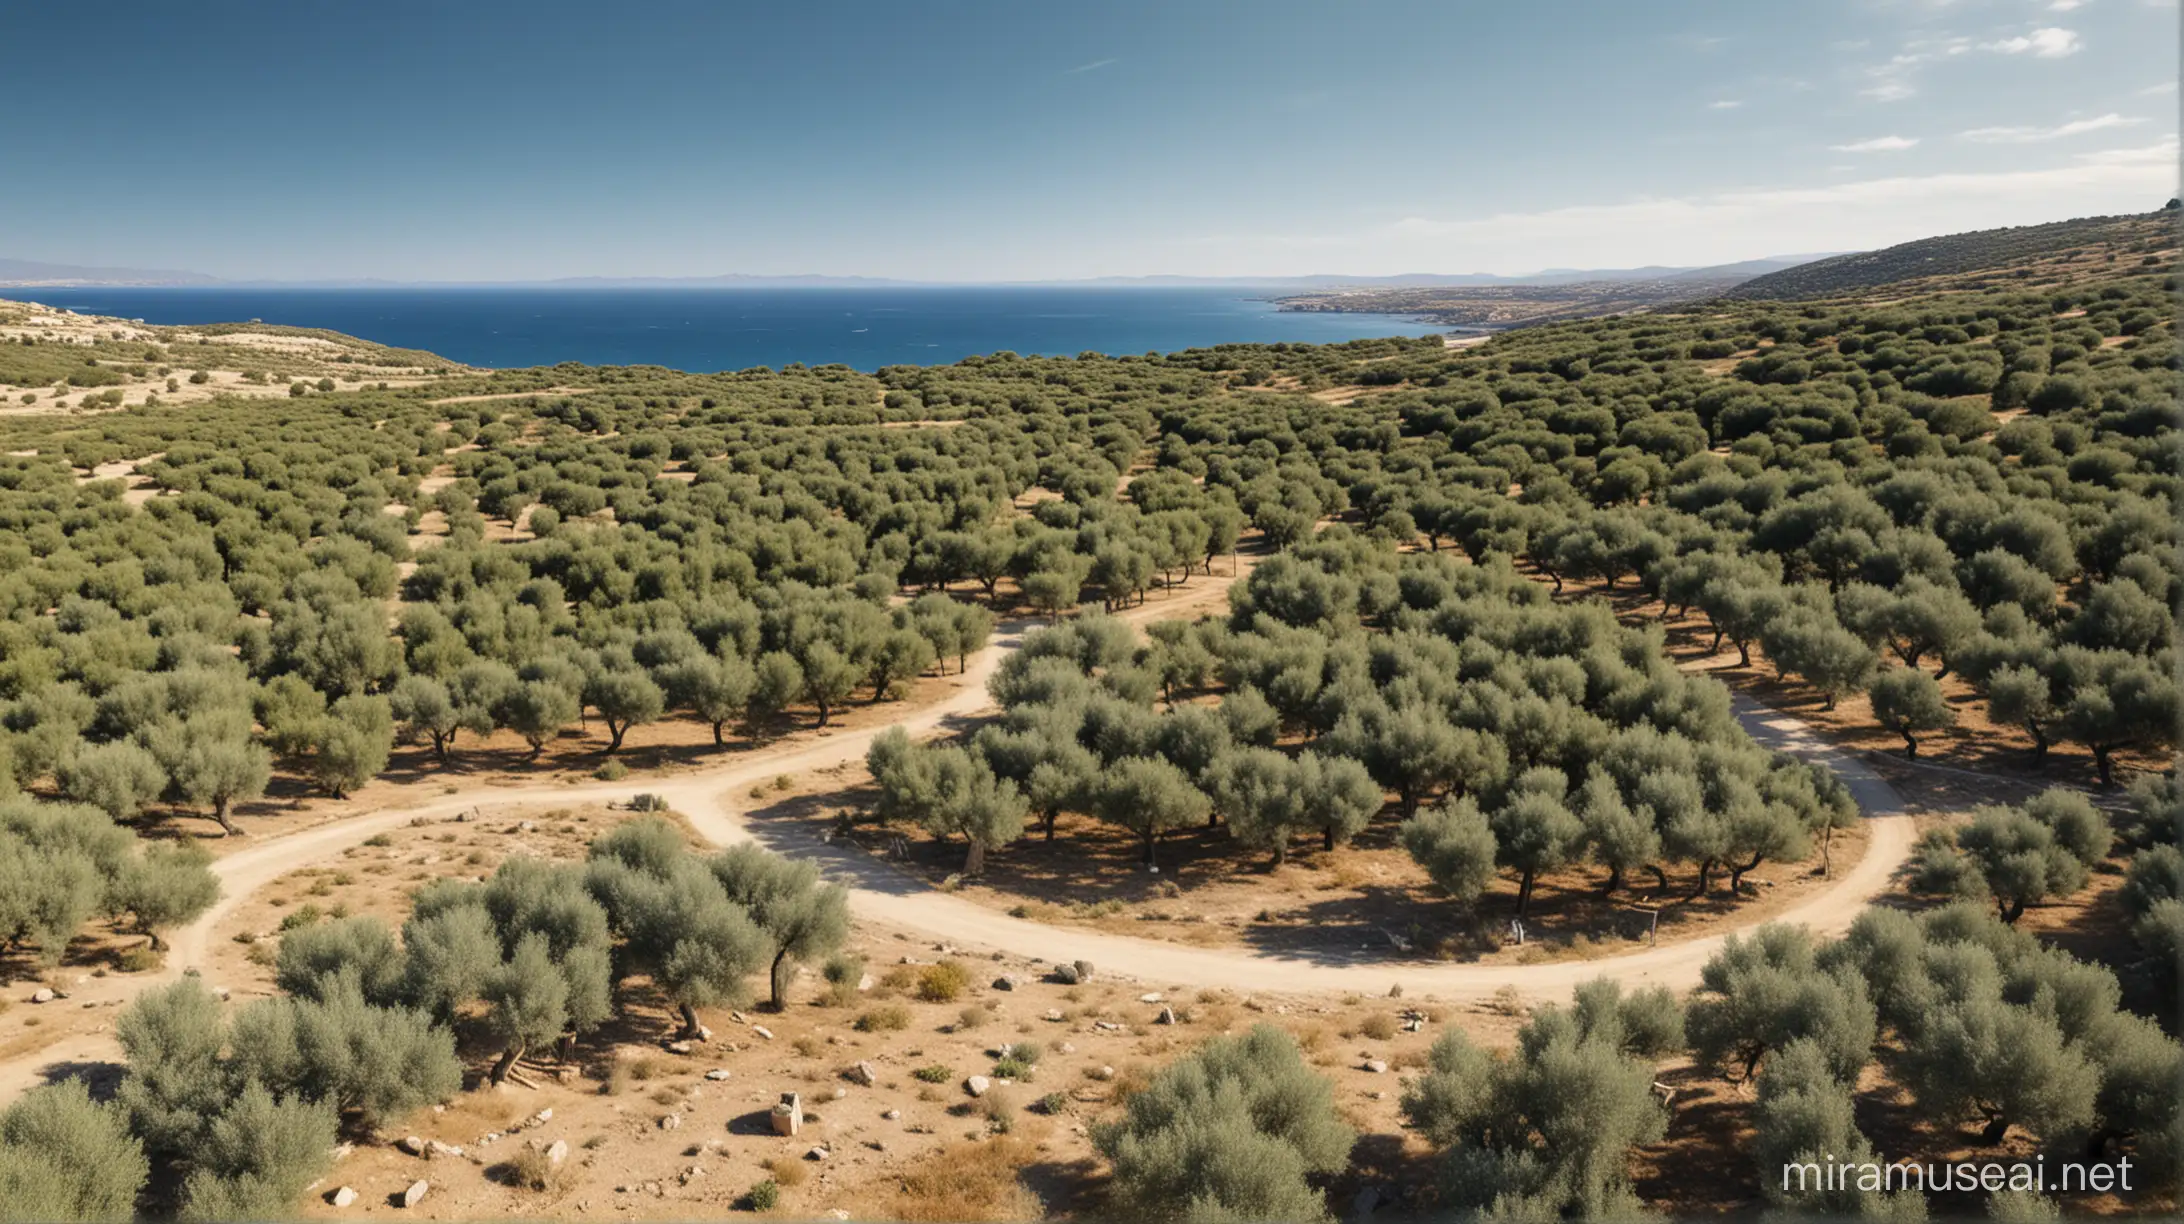 Aerial View of Mediterranean Sea Over Olive Grove